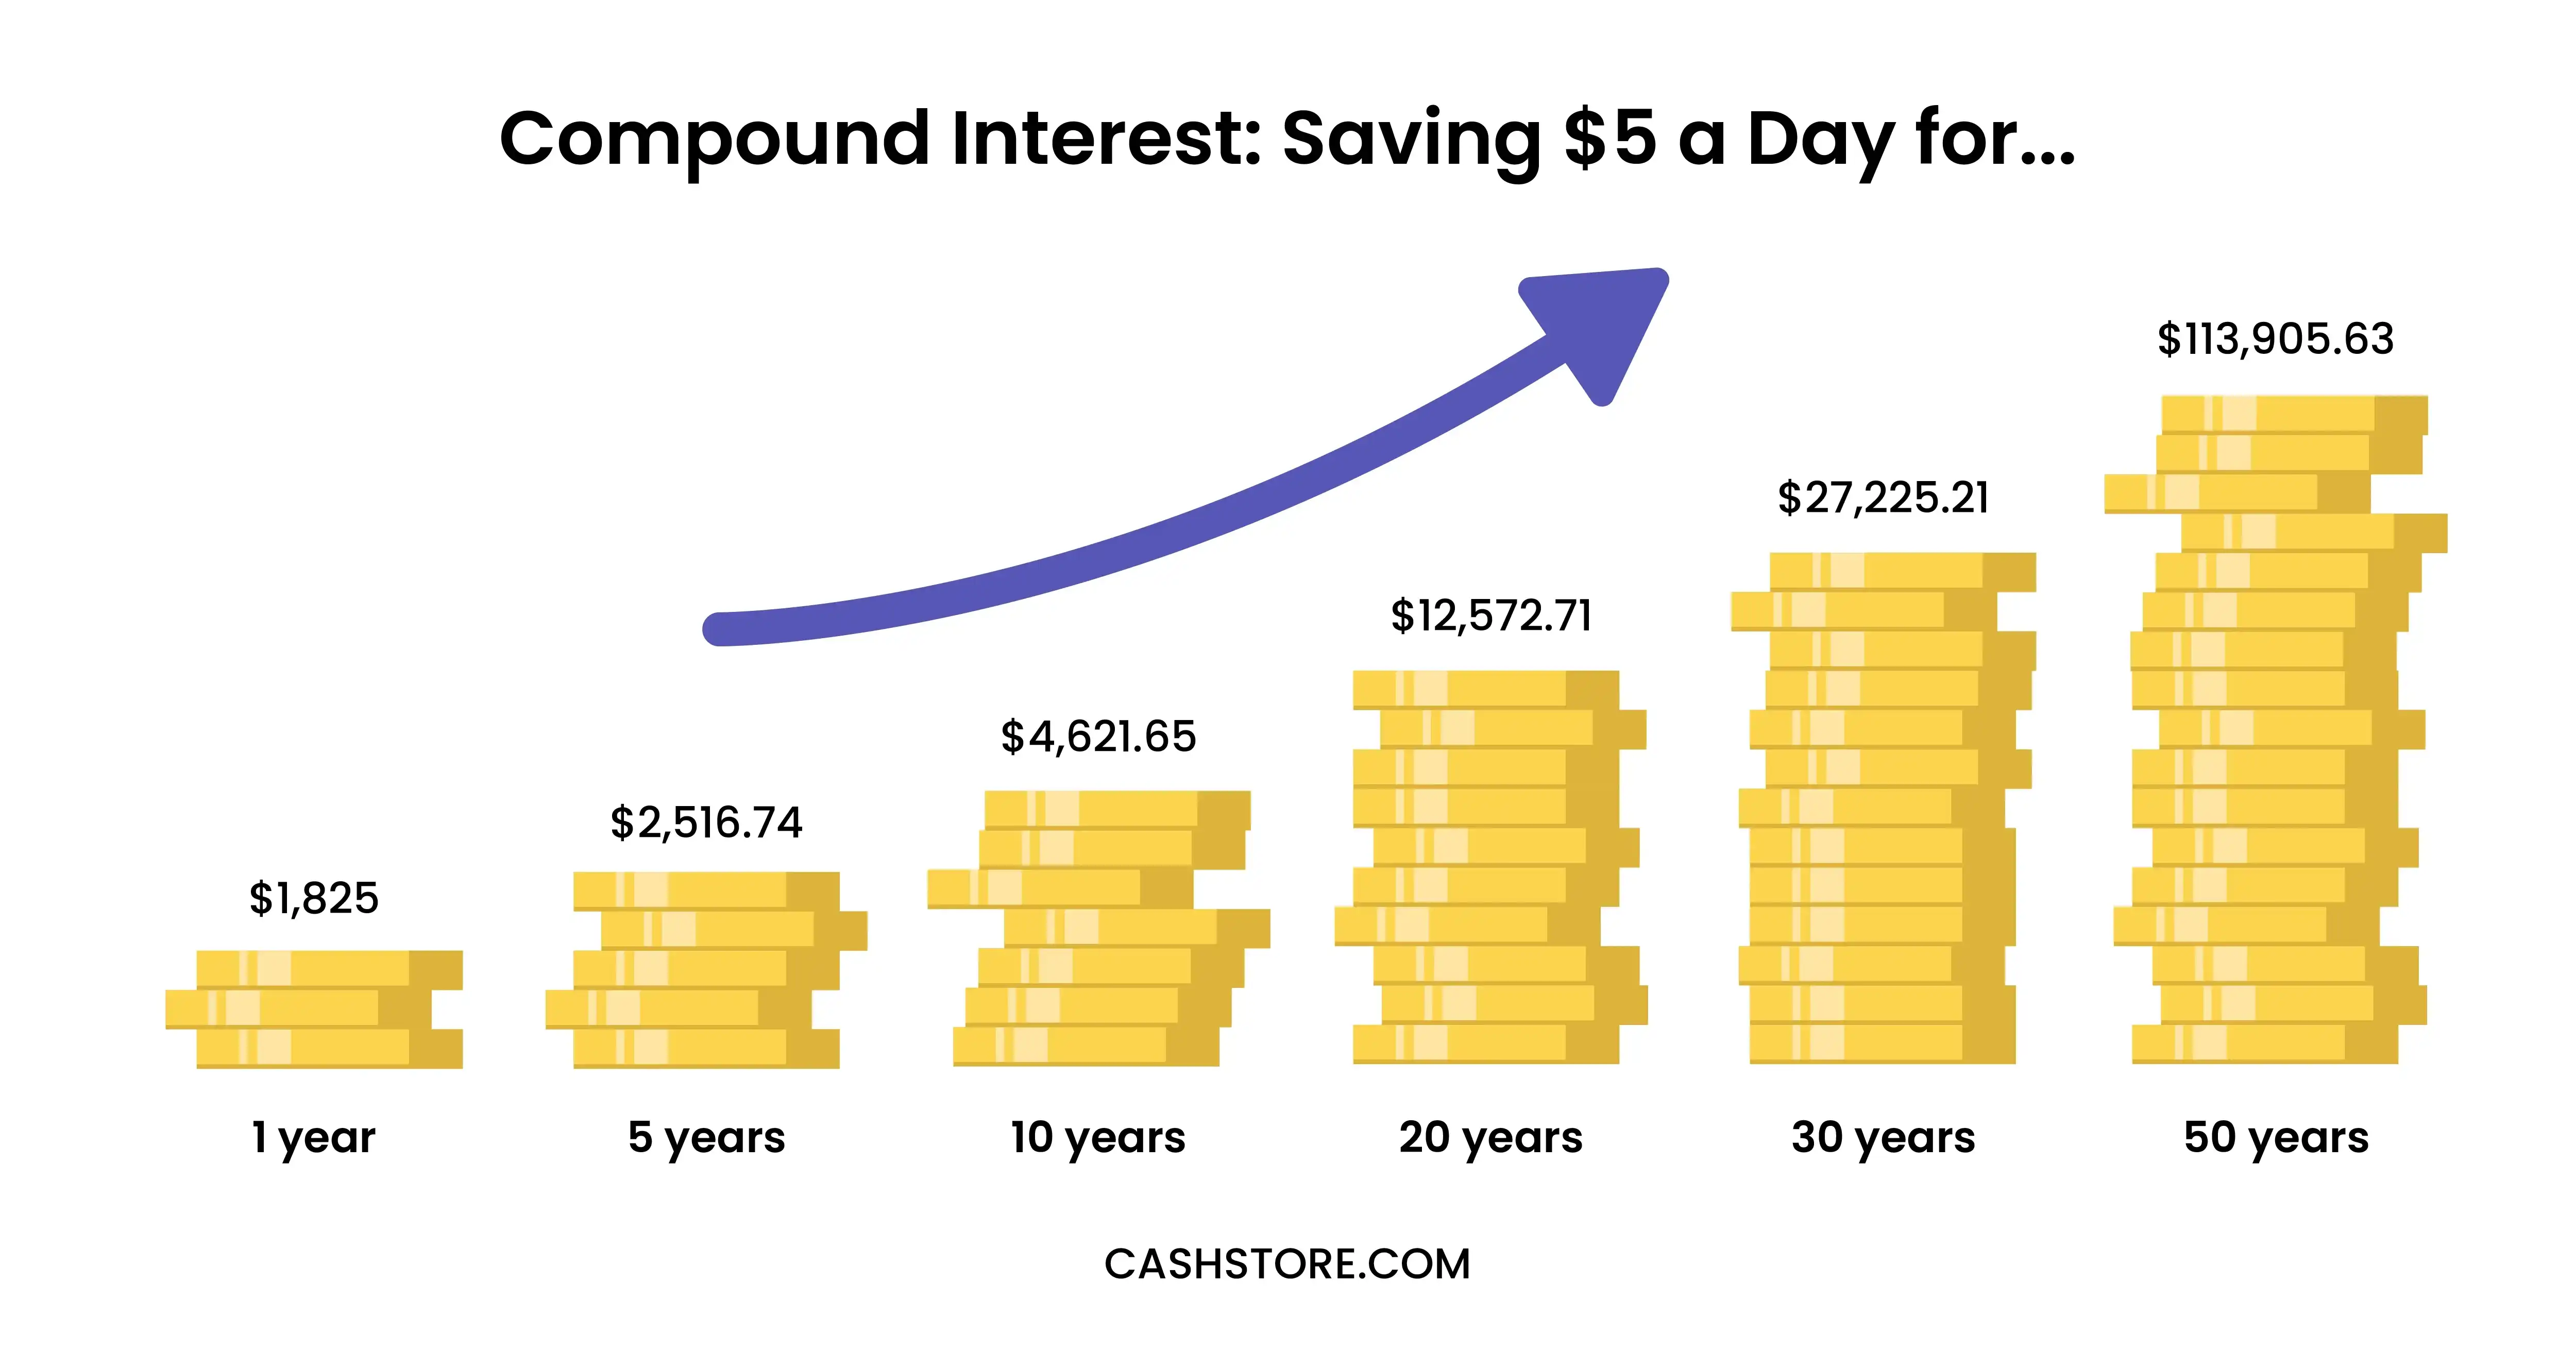 Compound Interest: Saving $5 a Day Over Time